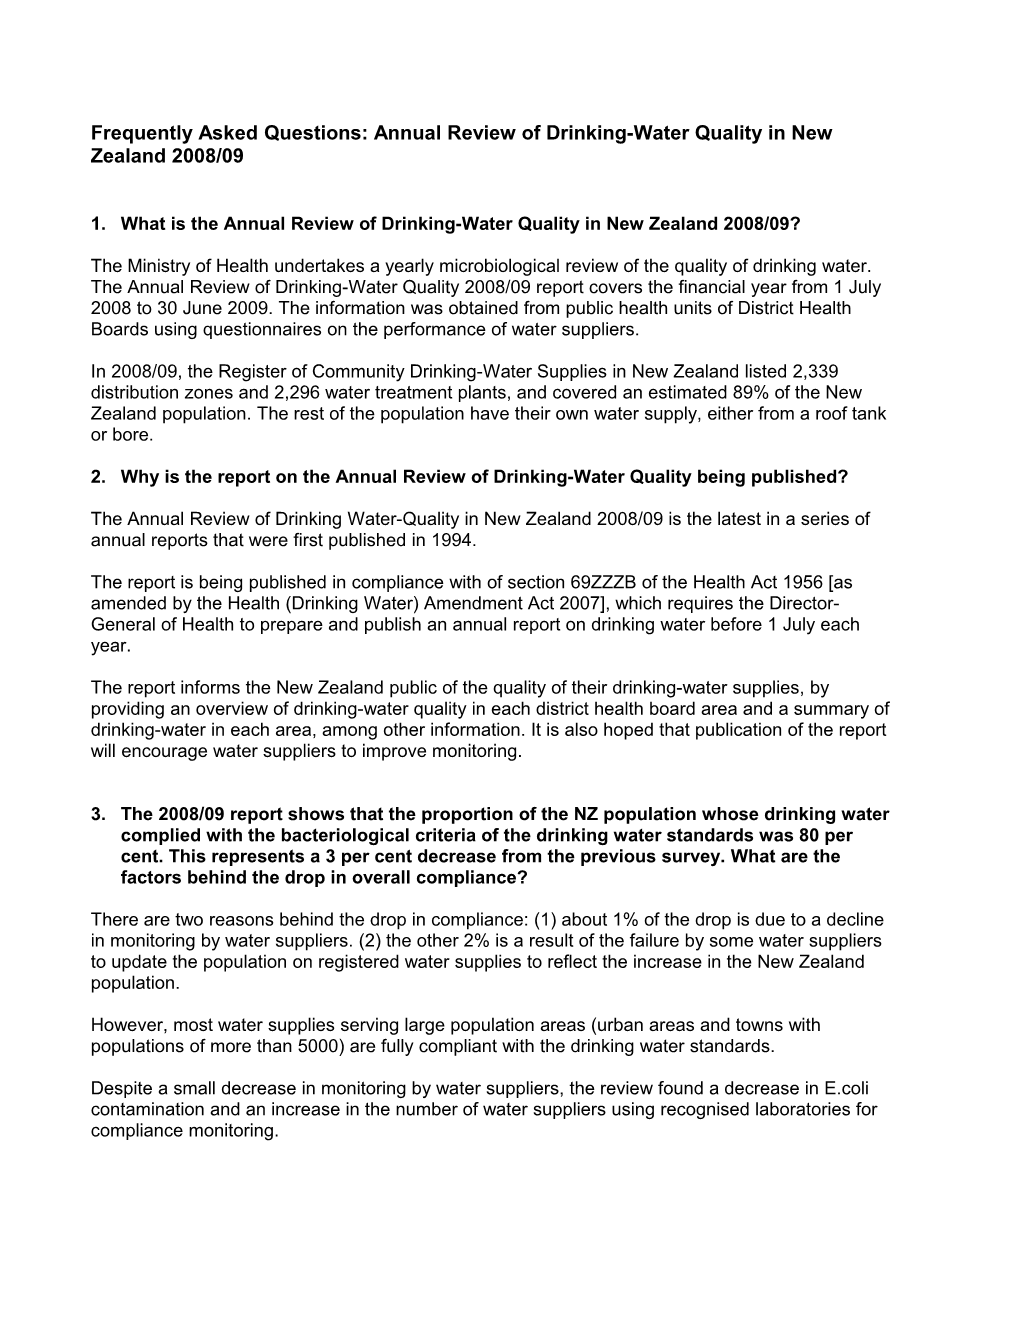 Frequently Asked Questions: Annual Review of Drinking-Water Quality in New Zealand 2008/09